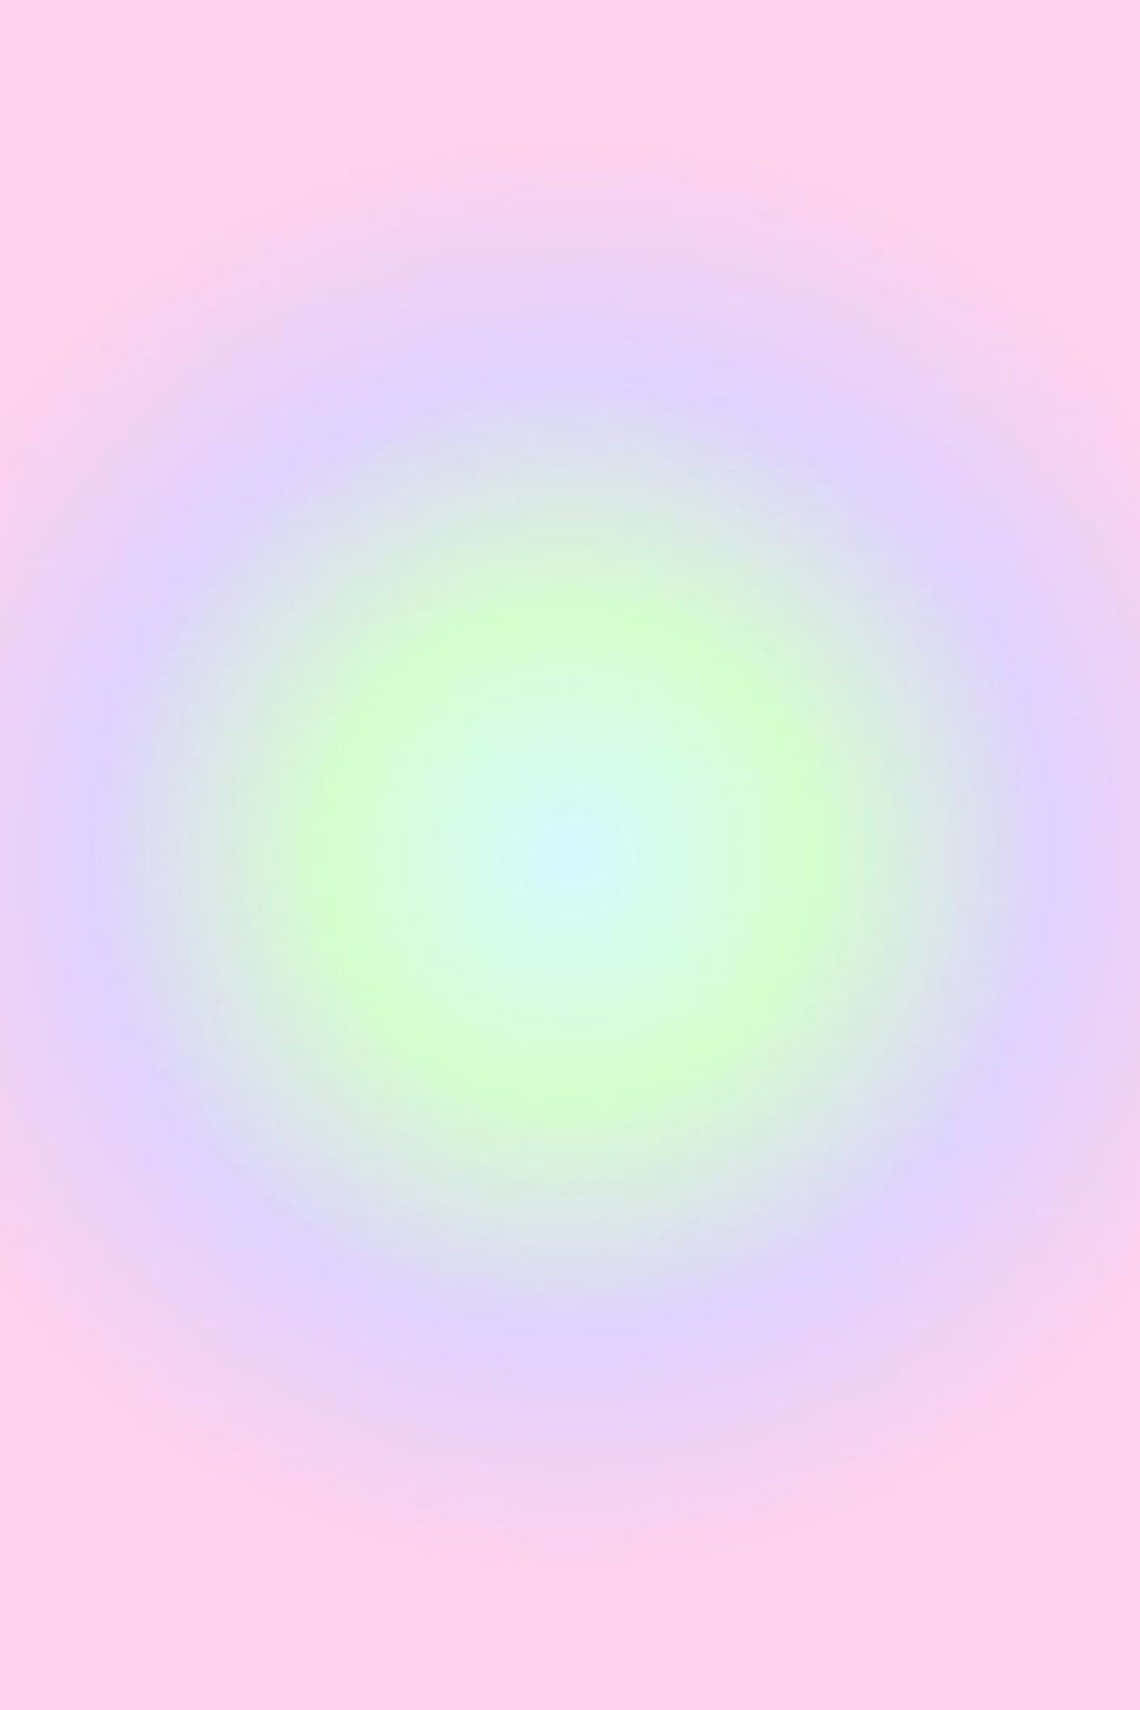 A pink and green background with an image of the sun - Danish